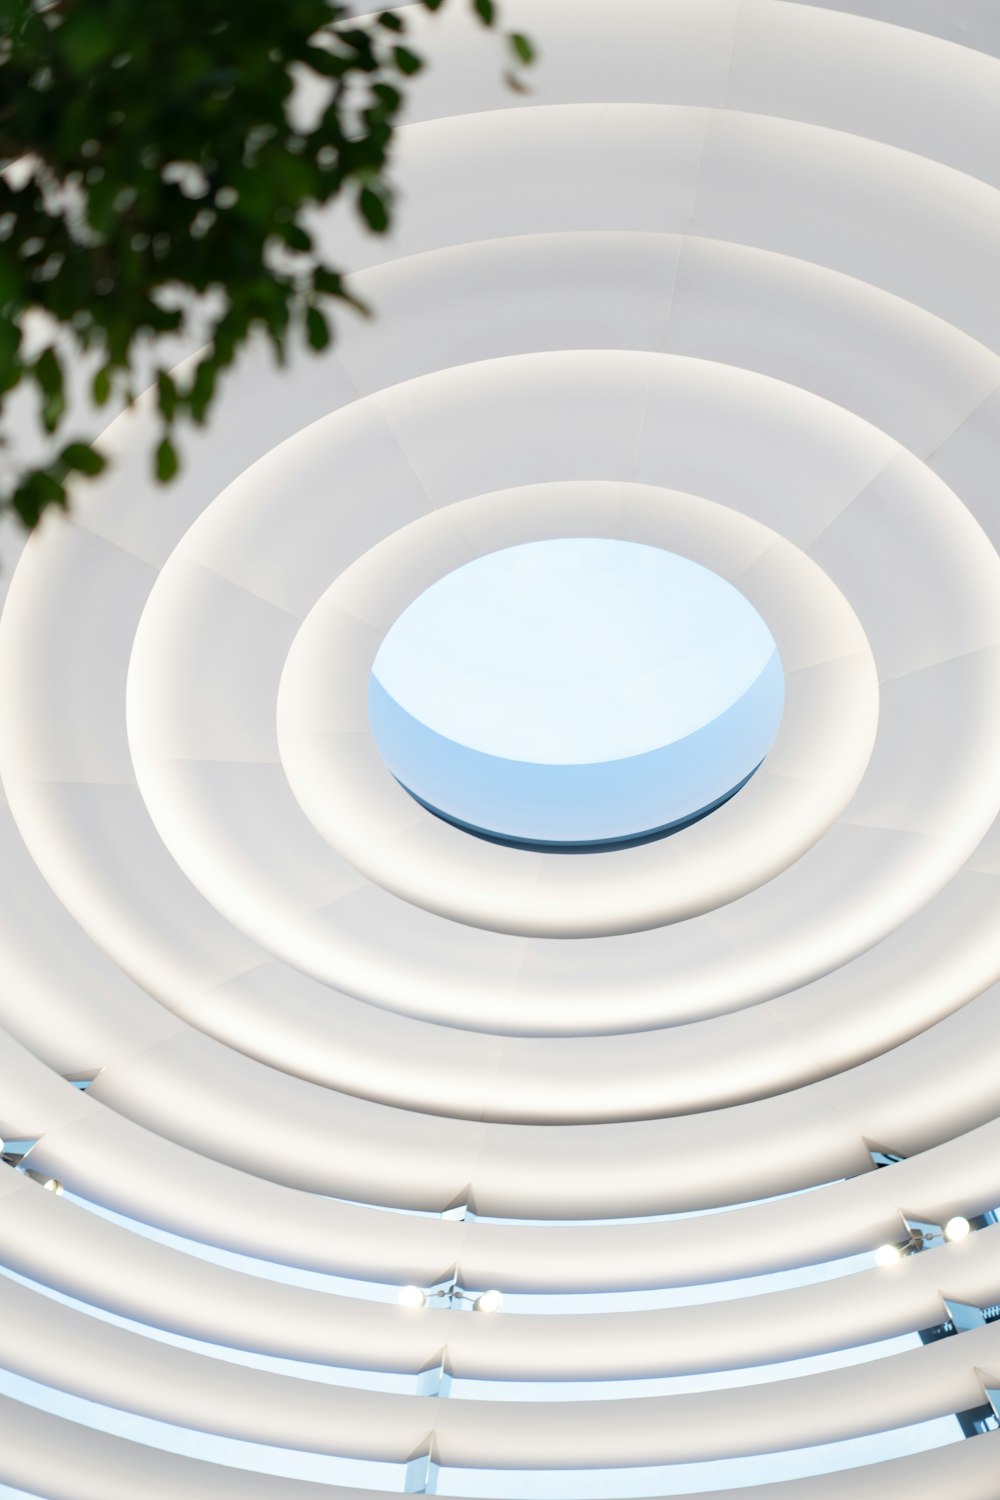 a white circular structure with a skylight in the center